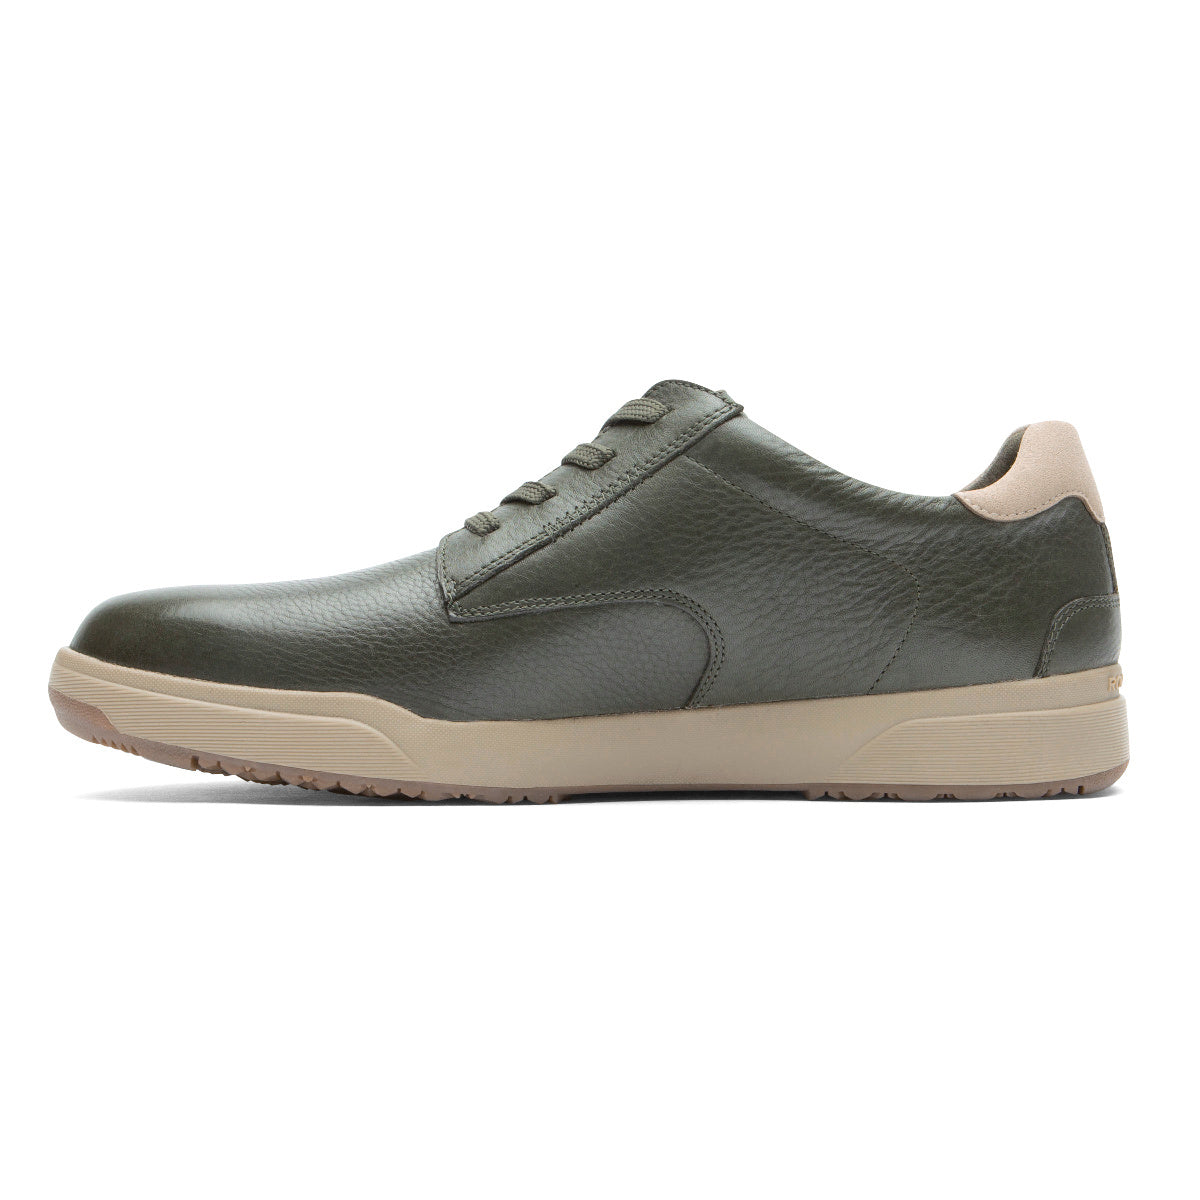 Rockport Bronson Plain Toe - Forest Green Leather